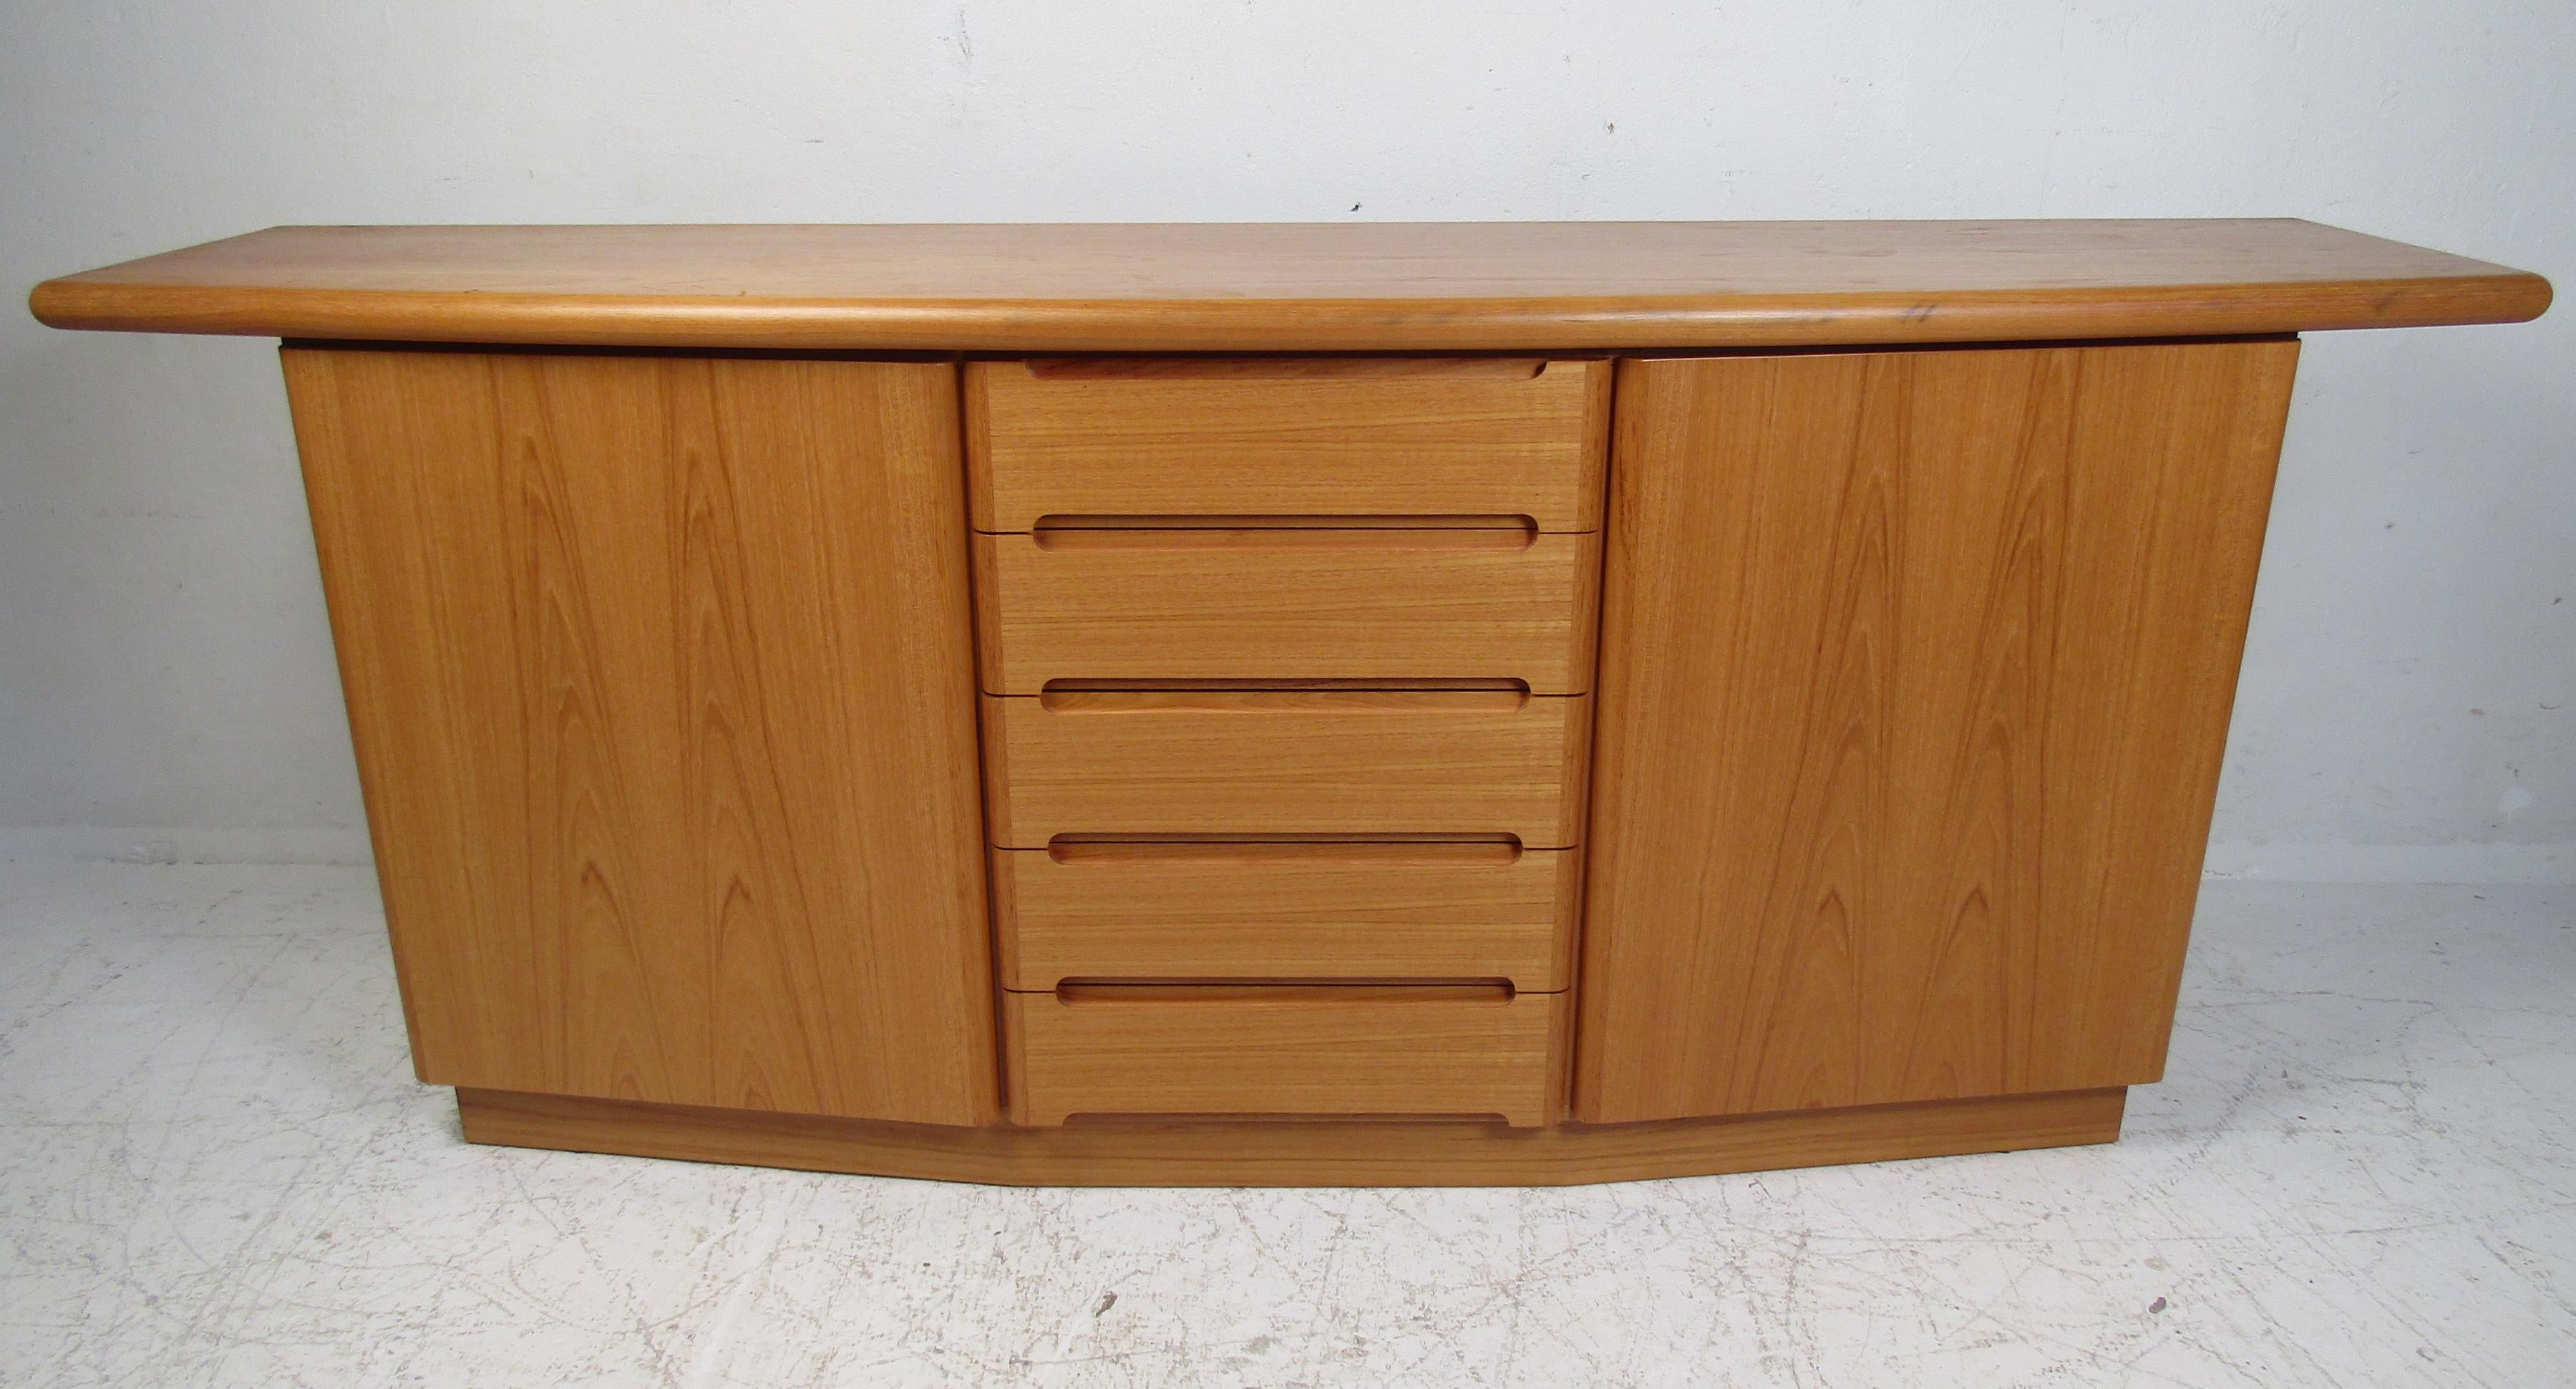 This beautiful vintage Danish server features an overhanging top with a curved front and a rich teak finish. A unique design that offers plenty of room for storage within its hefty drawers and large storage compartments. This stylish case piece